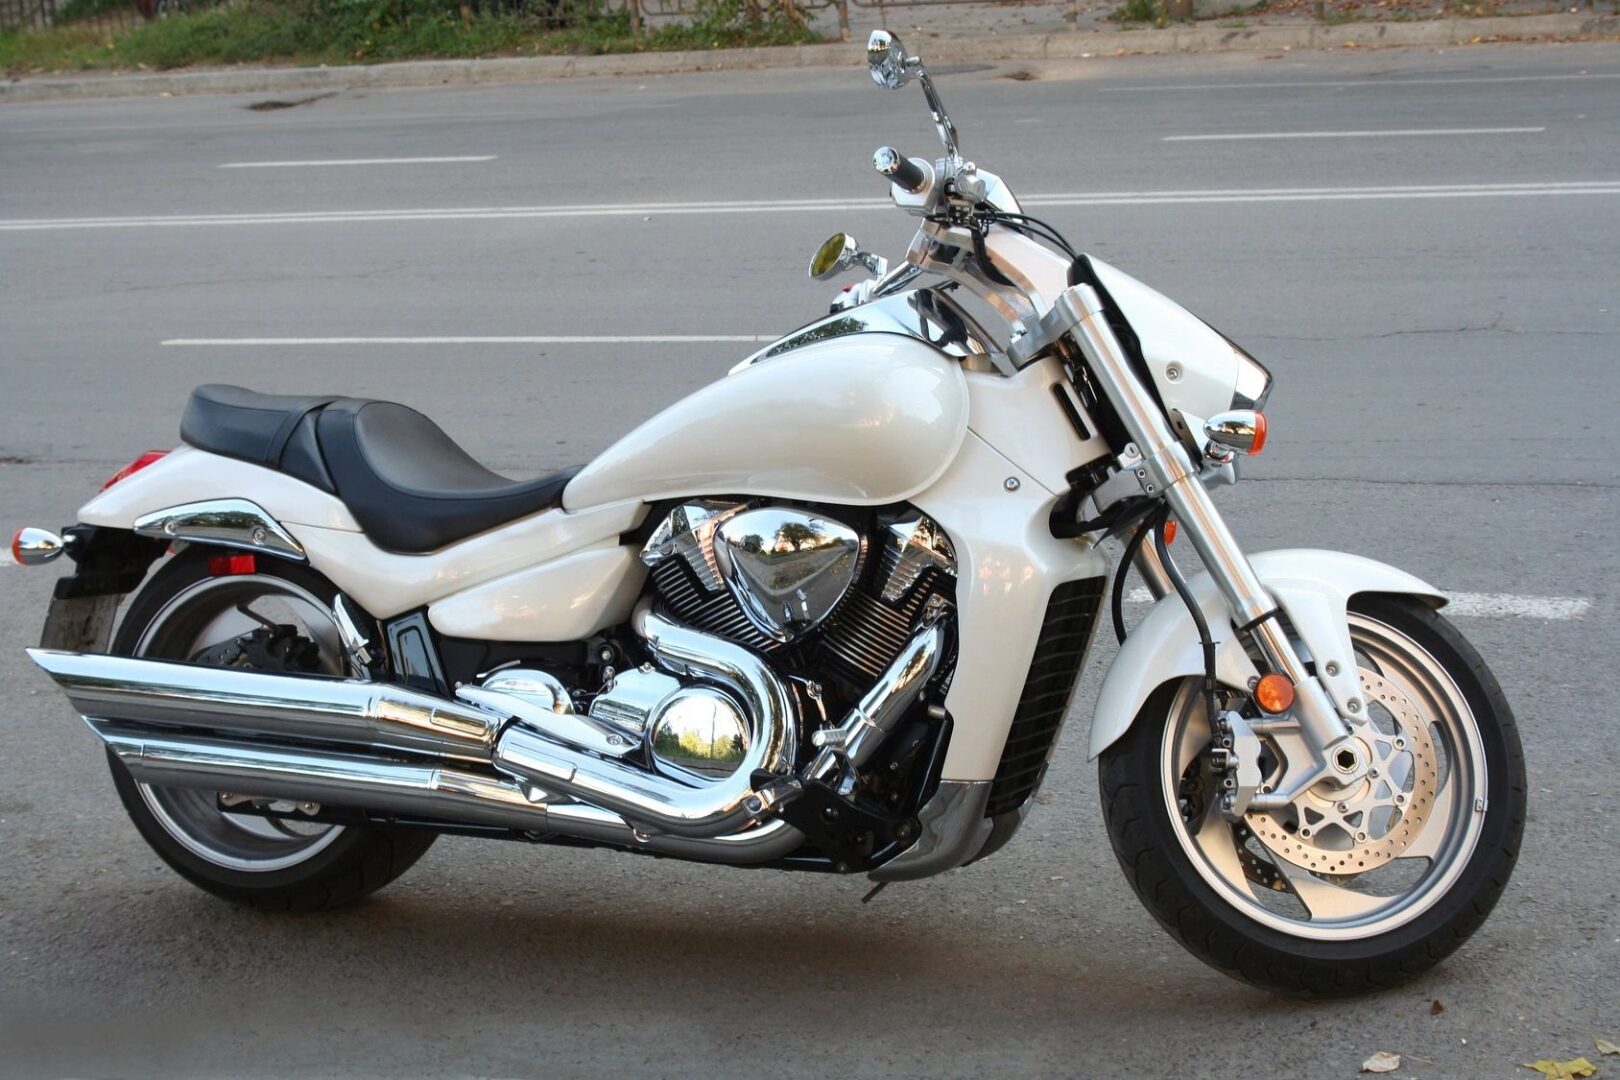 A white motorcycle parked on the side of a road.